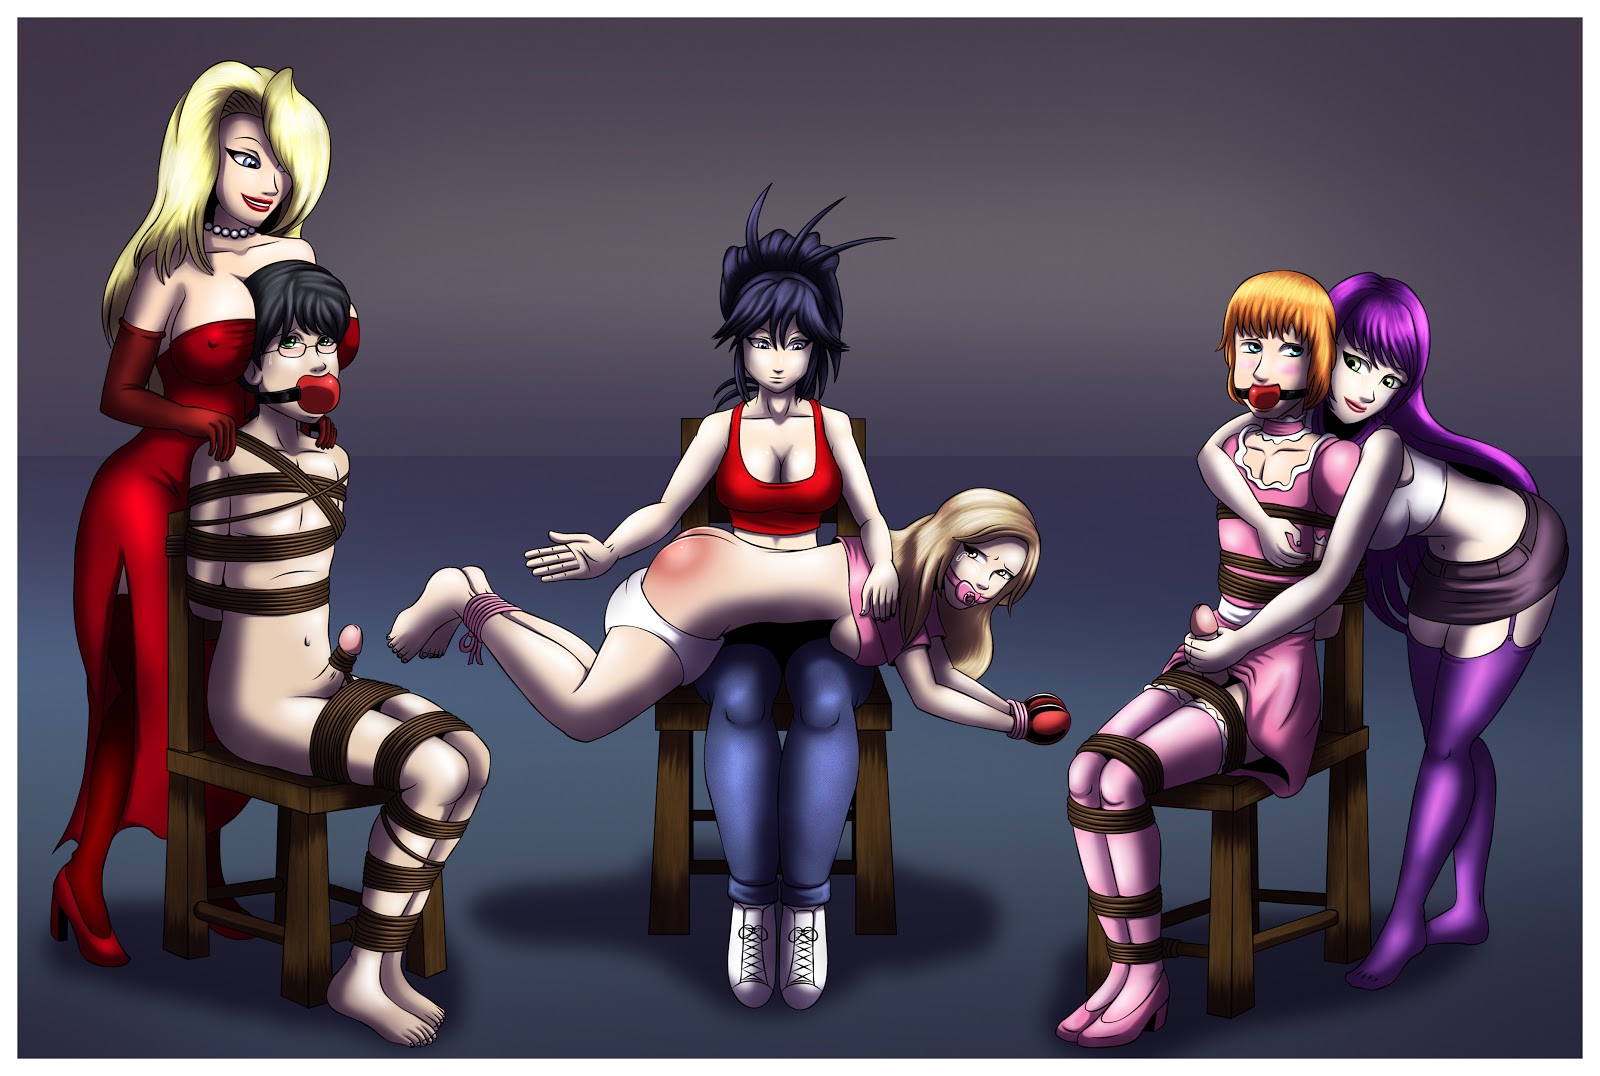 The commissioner OC's Gloria, Kalte and Grace have captured, tied and ...